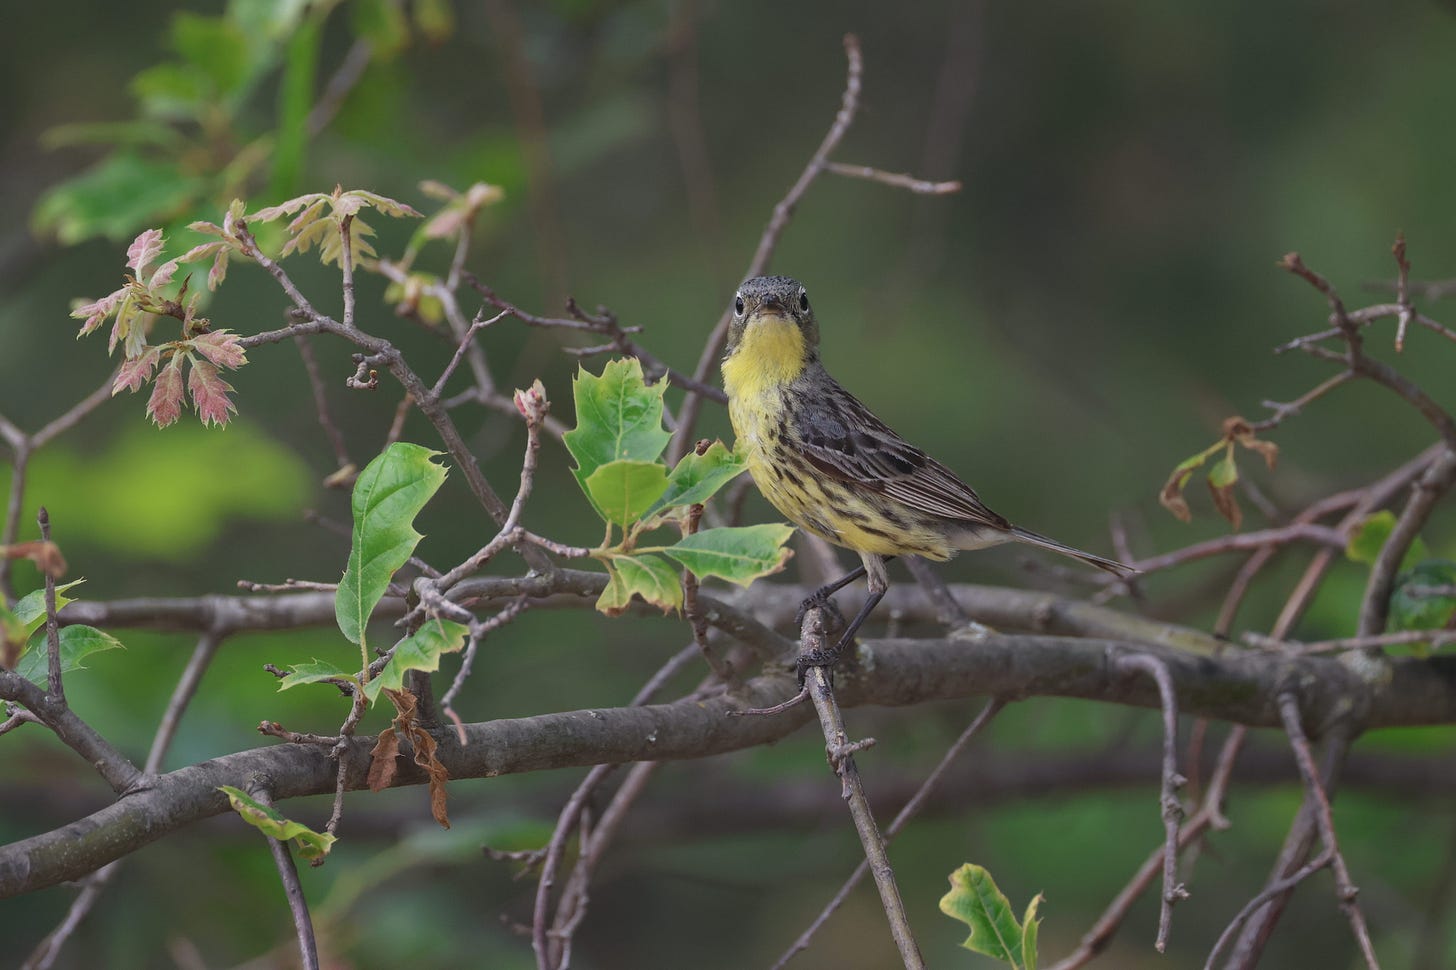 a yellow-bellied, gray-backed bird with dark streaks on its flanks and back, perched in a tree with young oak leaves, body facing left, head facin the viewer.